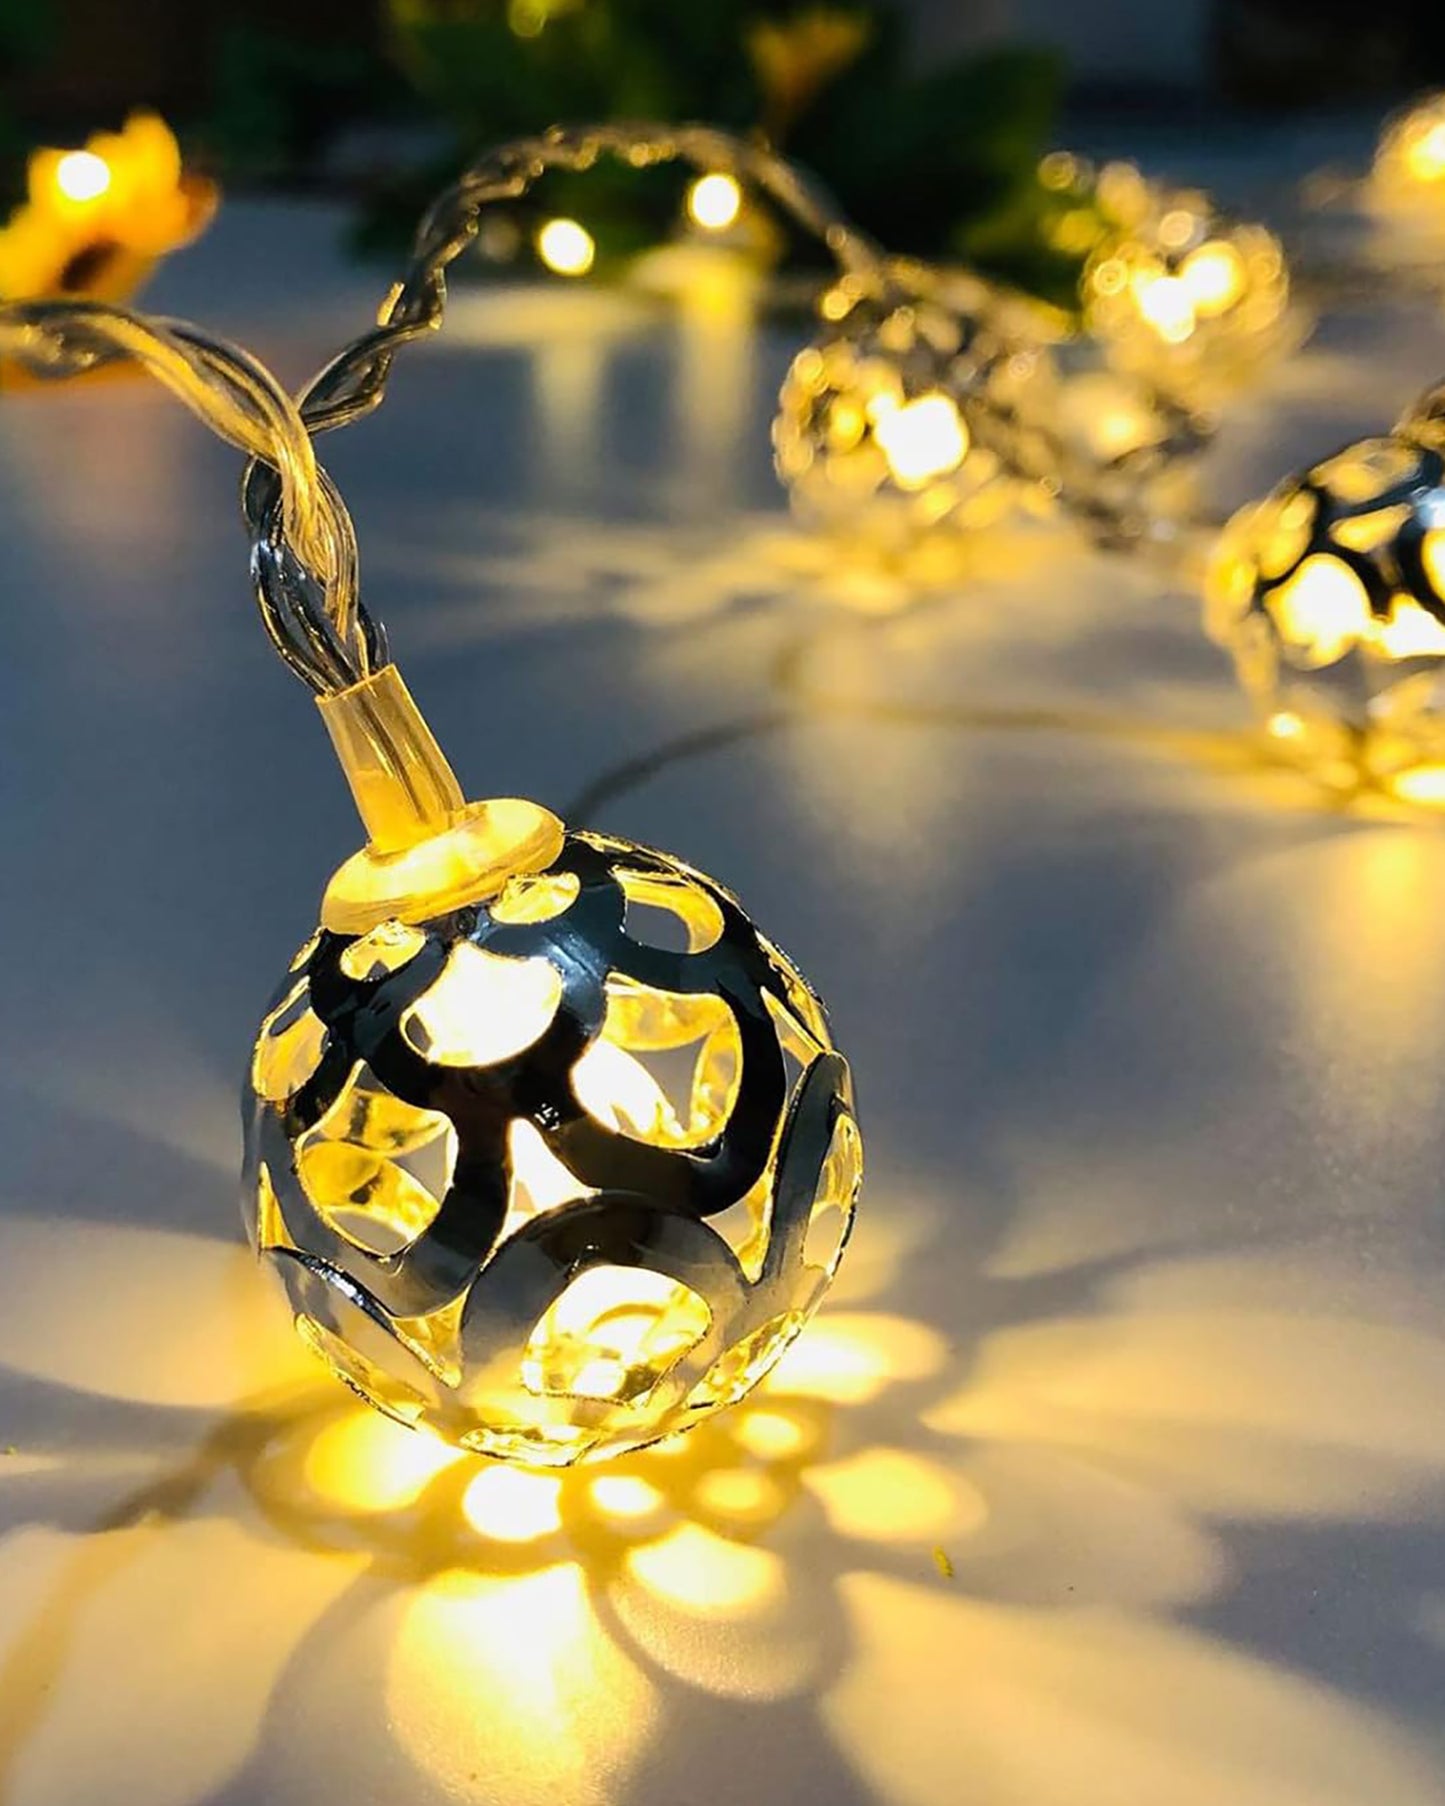 String Lights, Moroccon Copper Lights 5M 14LED Indoor Outdoor Fairy Globe String Lights,for Garden,Diwali,Christmas,Wedding,Home, Party Decoration (Warm White), Golden Metal ball